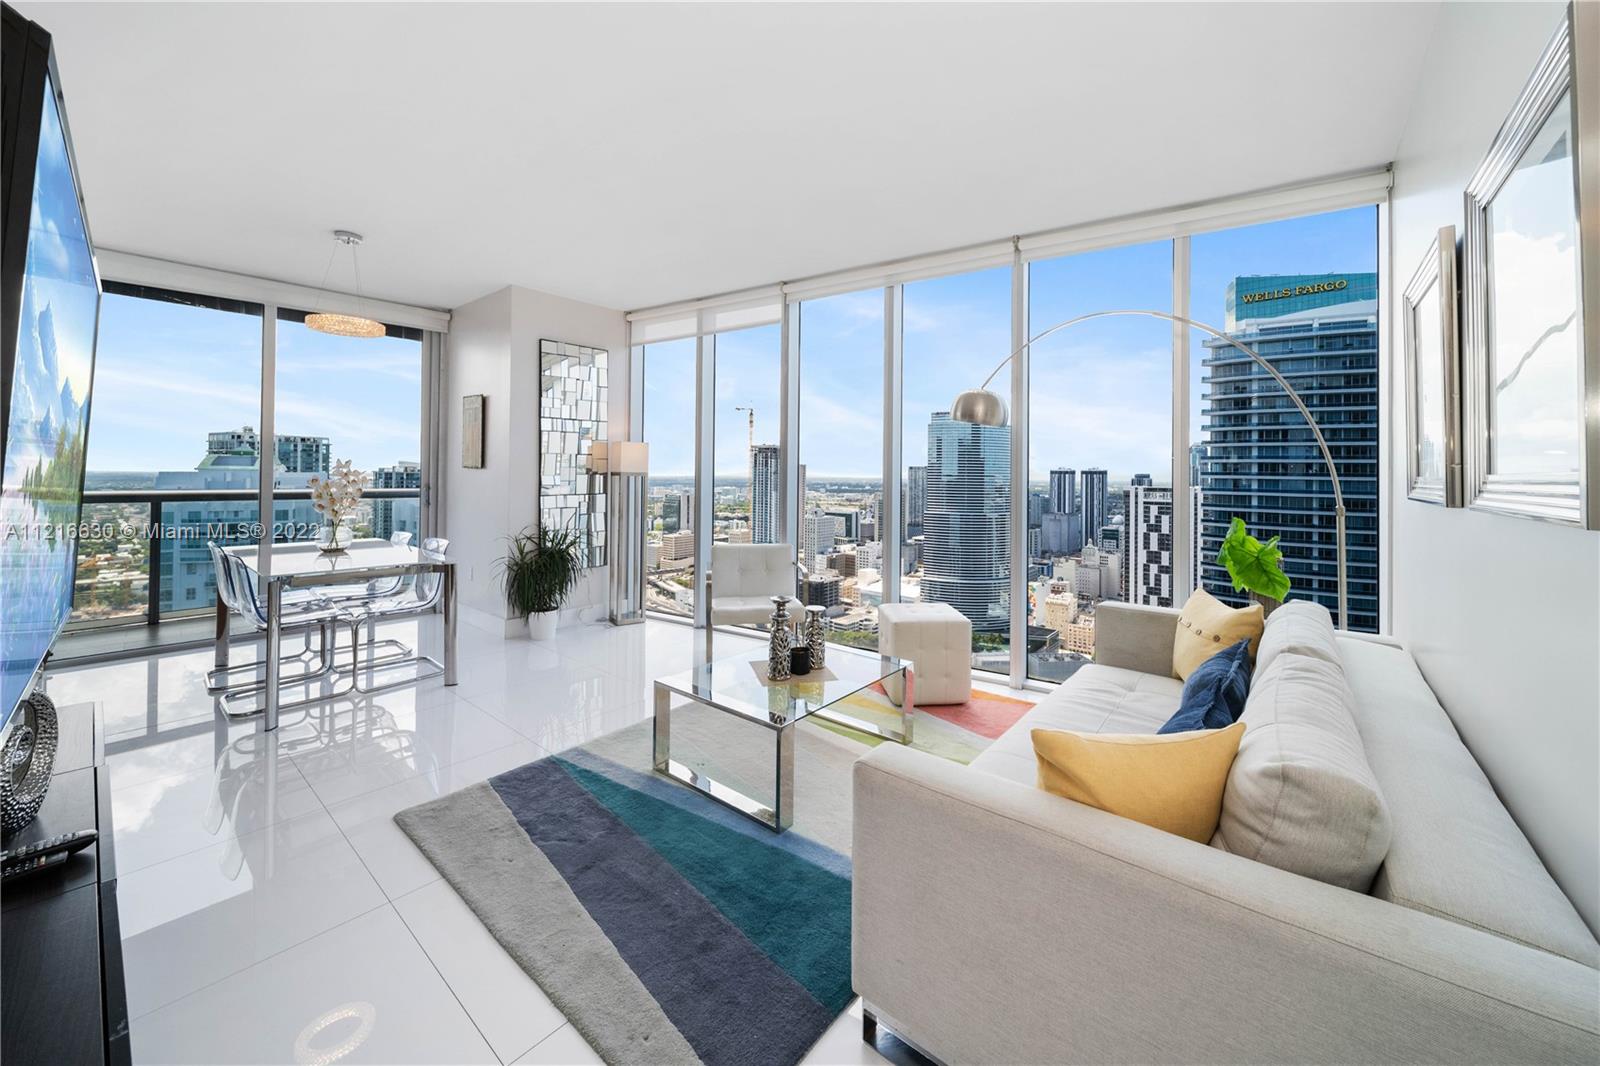 Best priced beautiful 2 bedrooms & 2 bathrooms, corner unit, tastefully furnished in a high floor at the Icon Brickell (W Hotel Tower). Perfect for investors, AirB&B Allowed with no rental restrictions. Enjoy all the amenities as the W hotel has to offer.